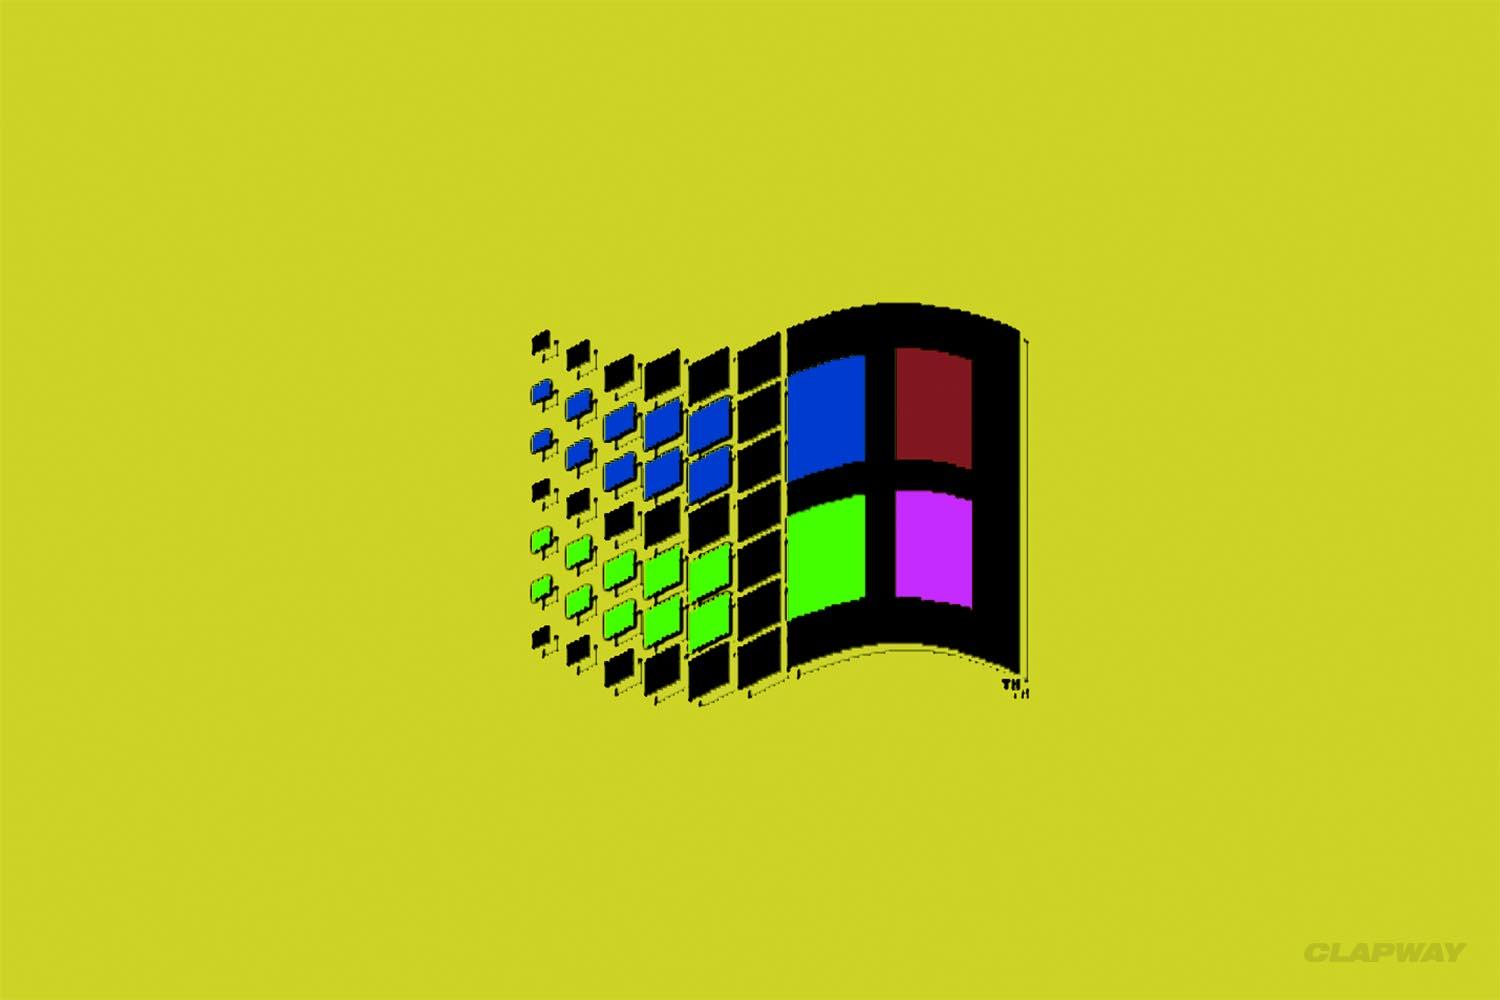 Microsoft Windows 3.1 Logo - Reasons Why The Ability to Play Microsoft Windows Games is Amazing